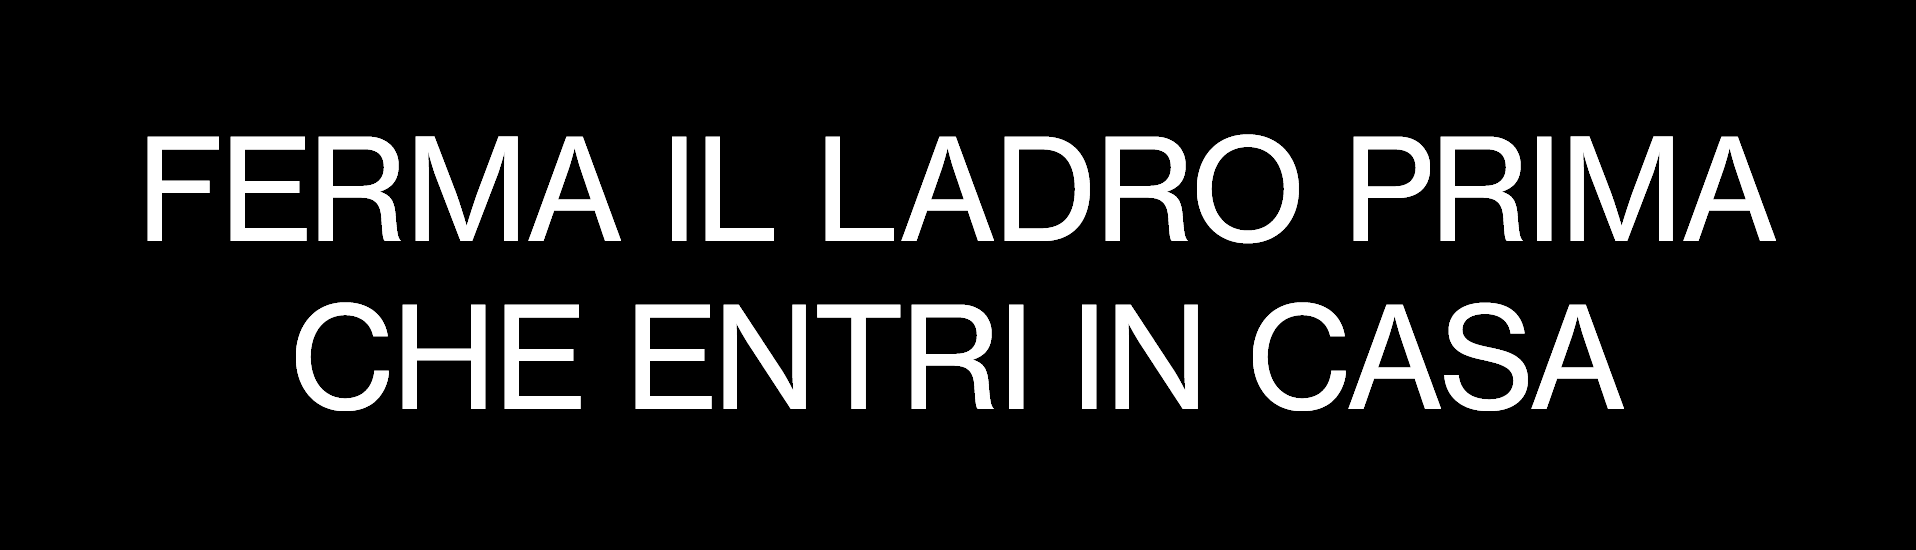 call-to-action-ladro